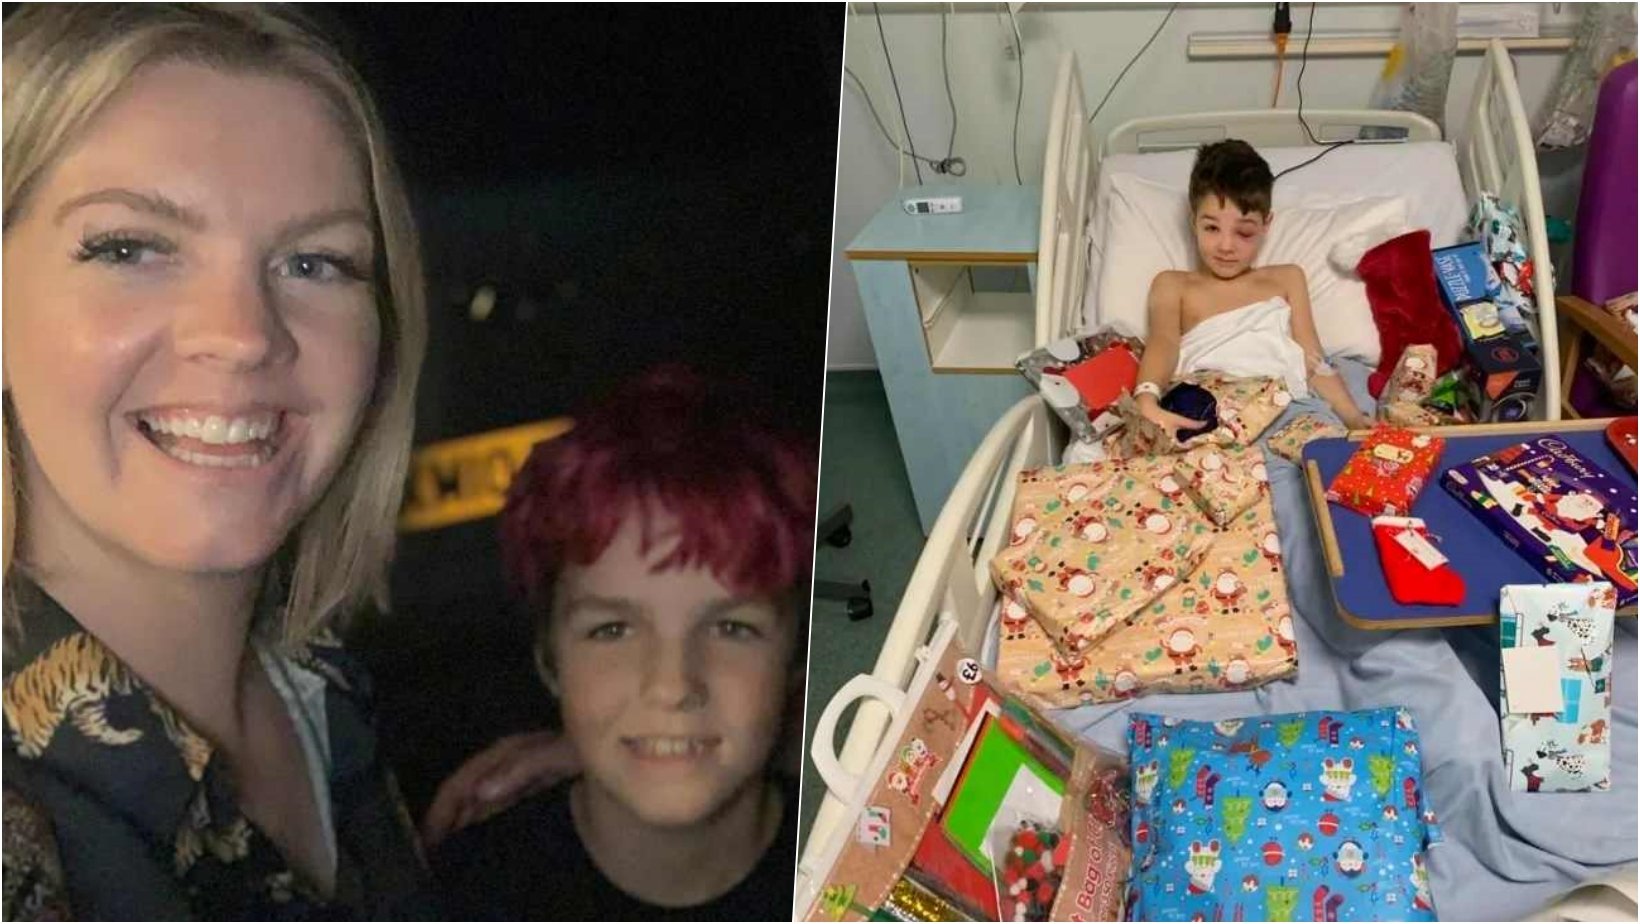 6 facebook cover 1.jpg?resize=1200,630 - 9-Year-Old Boy Spends Christmas In Hospital After Being Infected With “COVID EYE”